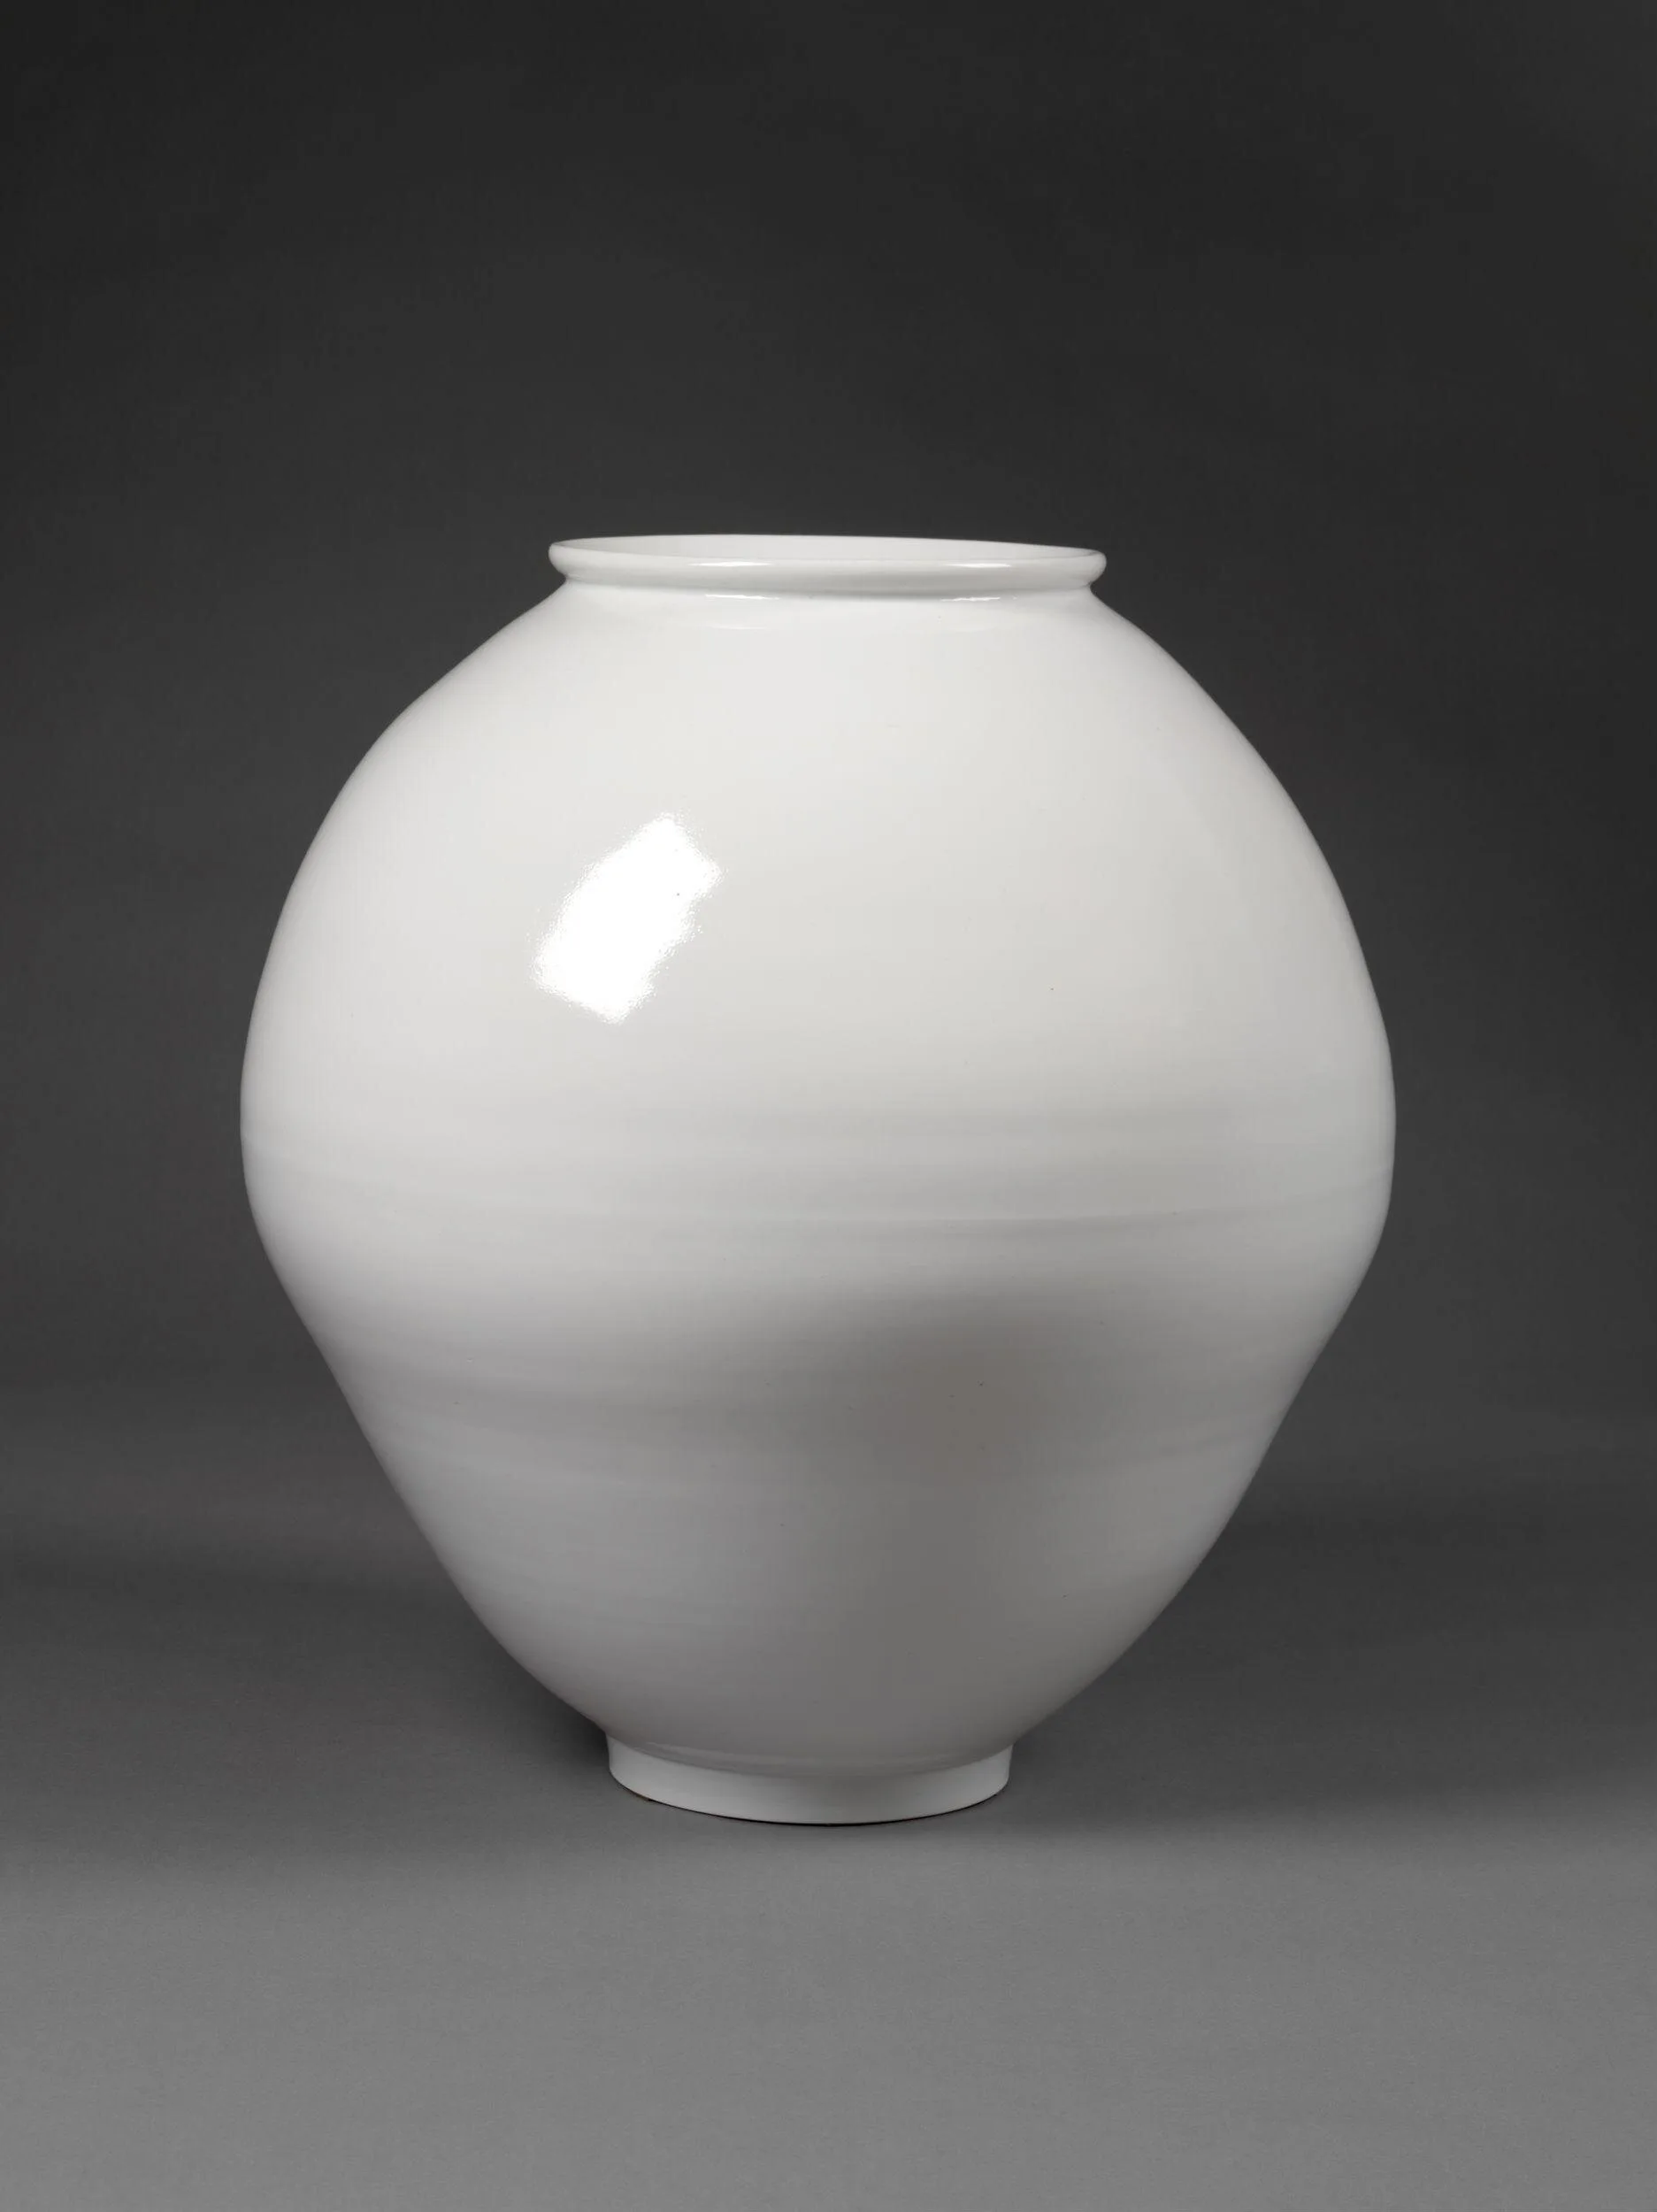 A photo of the white moon jar on a grey background made by Young Sook Park